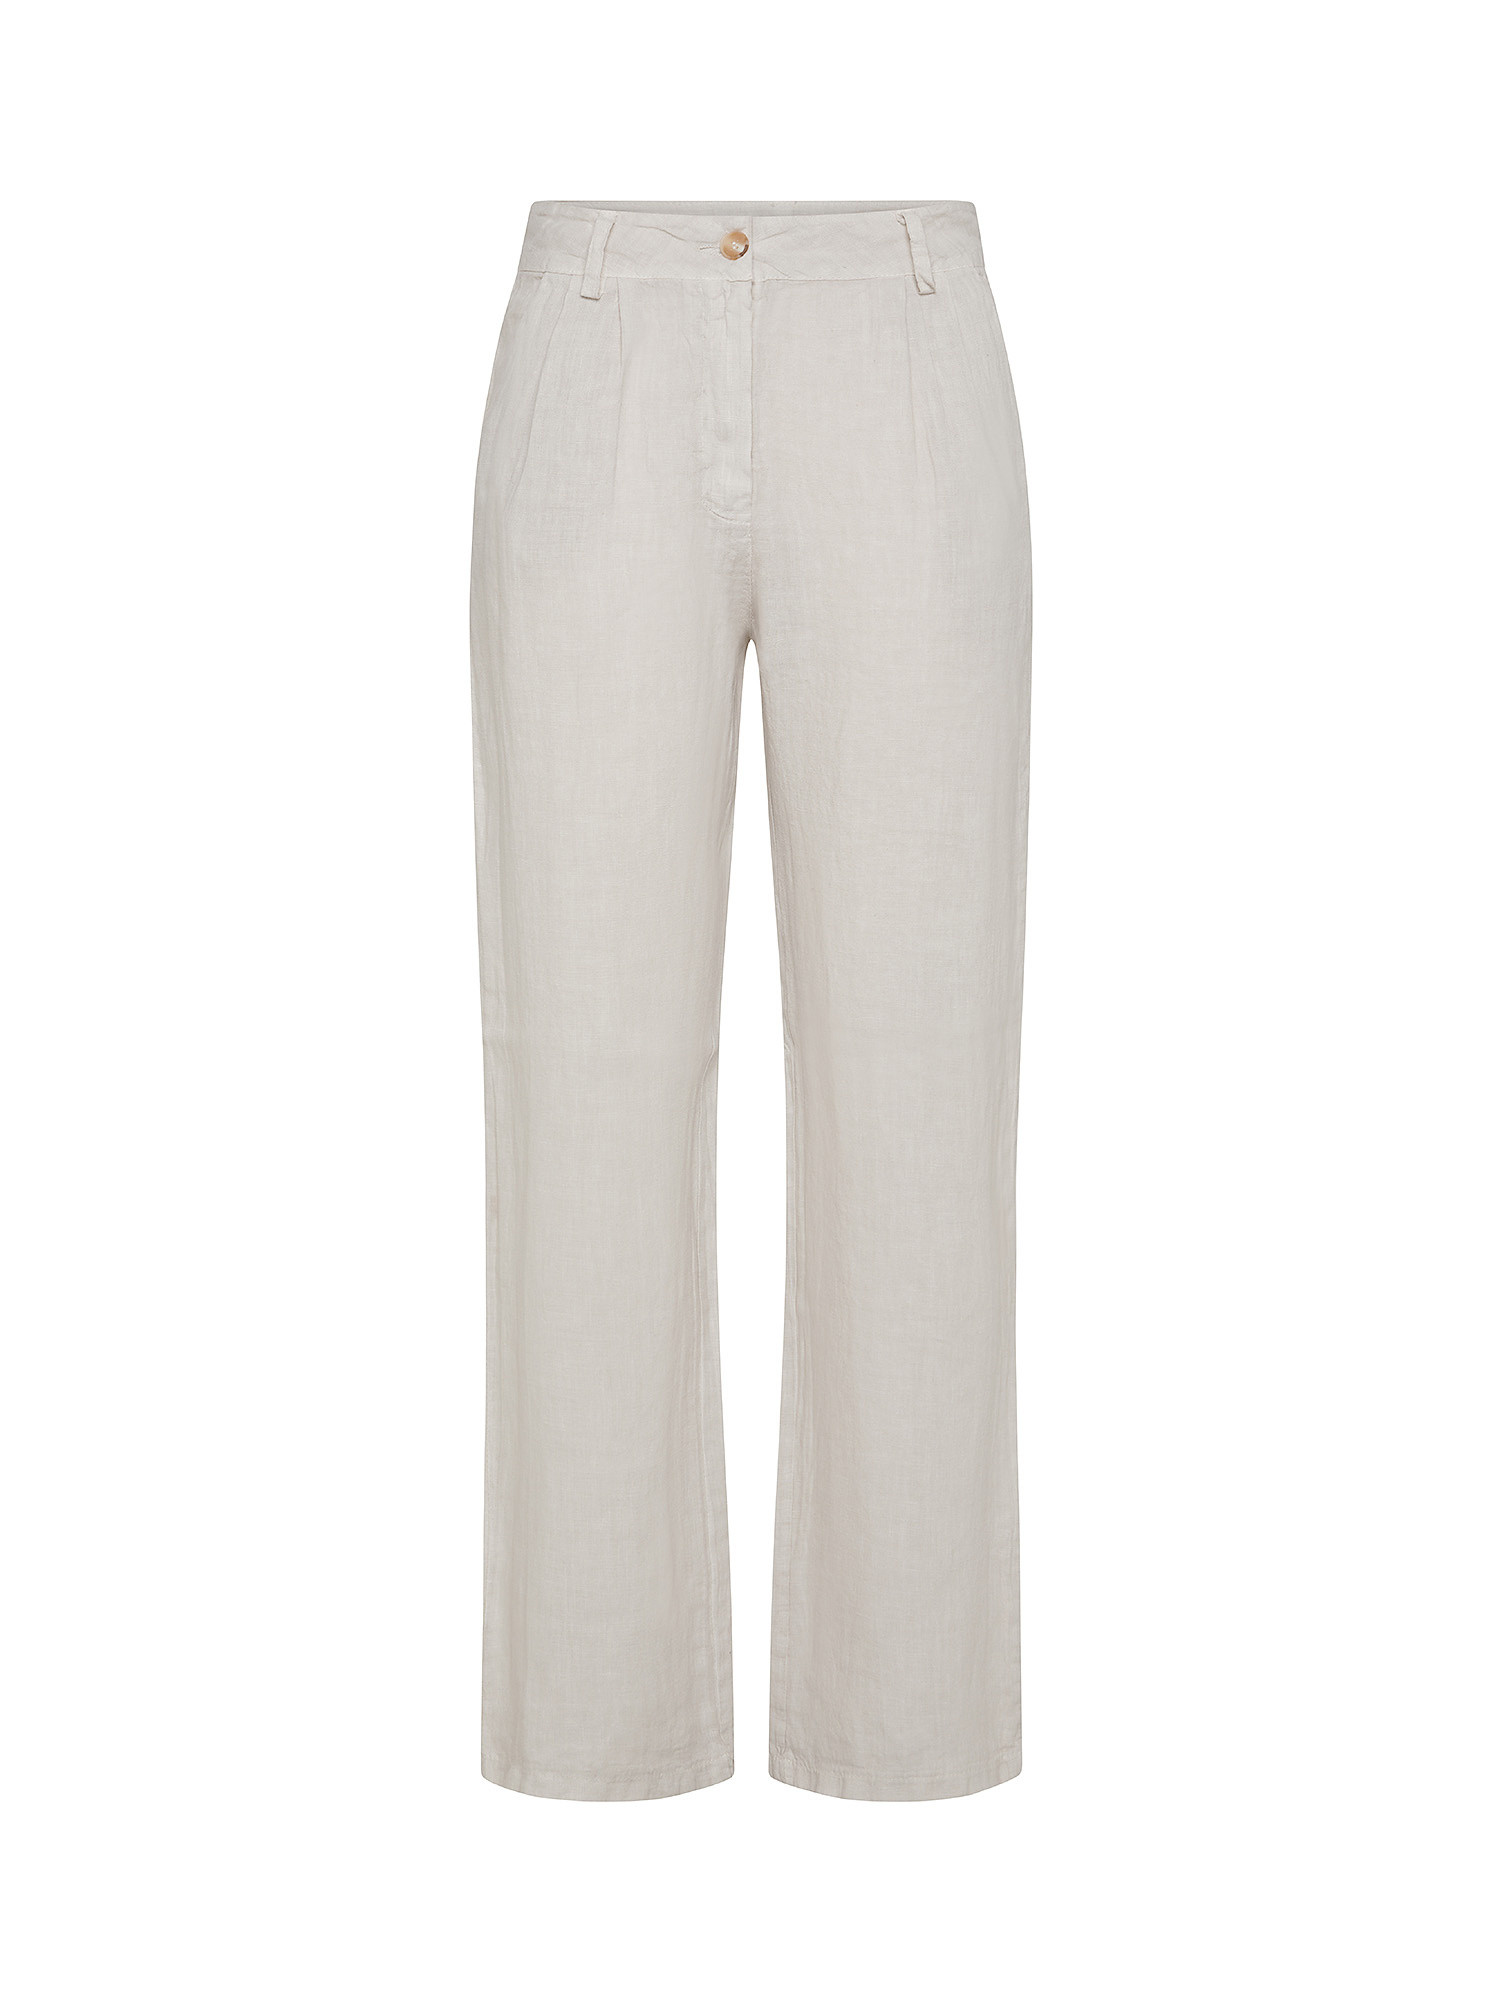 Koan - Linen trousers with pleats, Beige, large image number 0